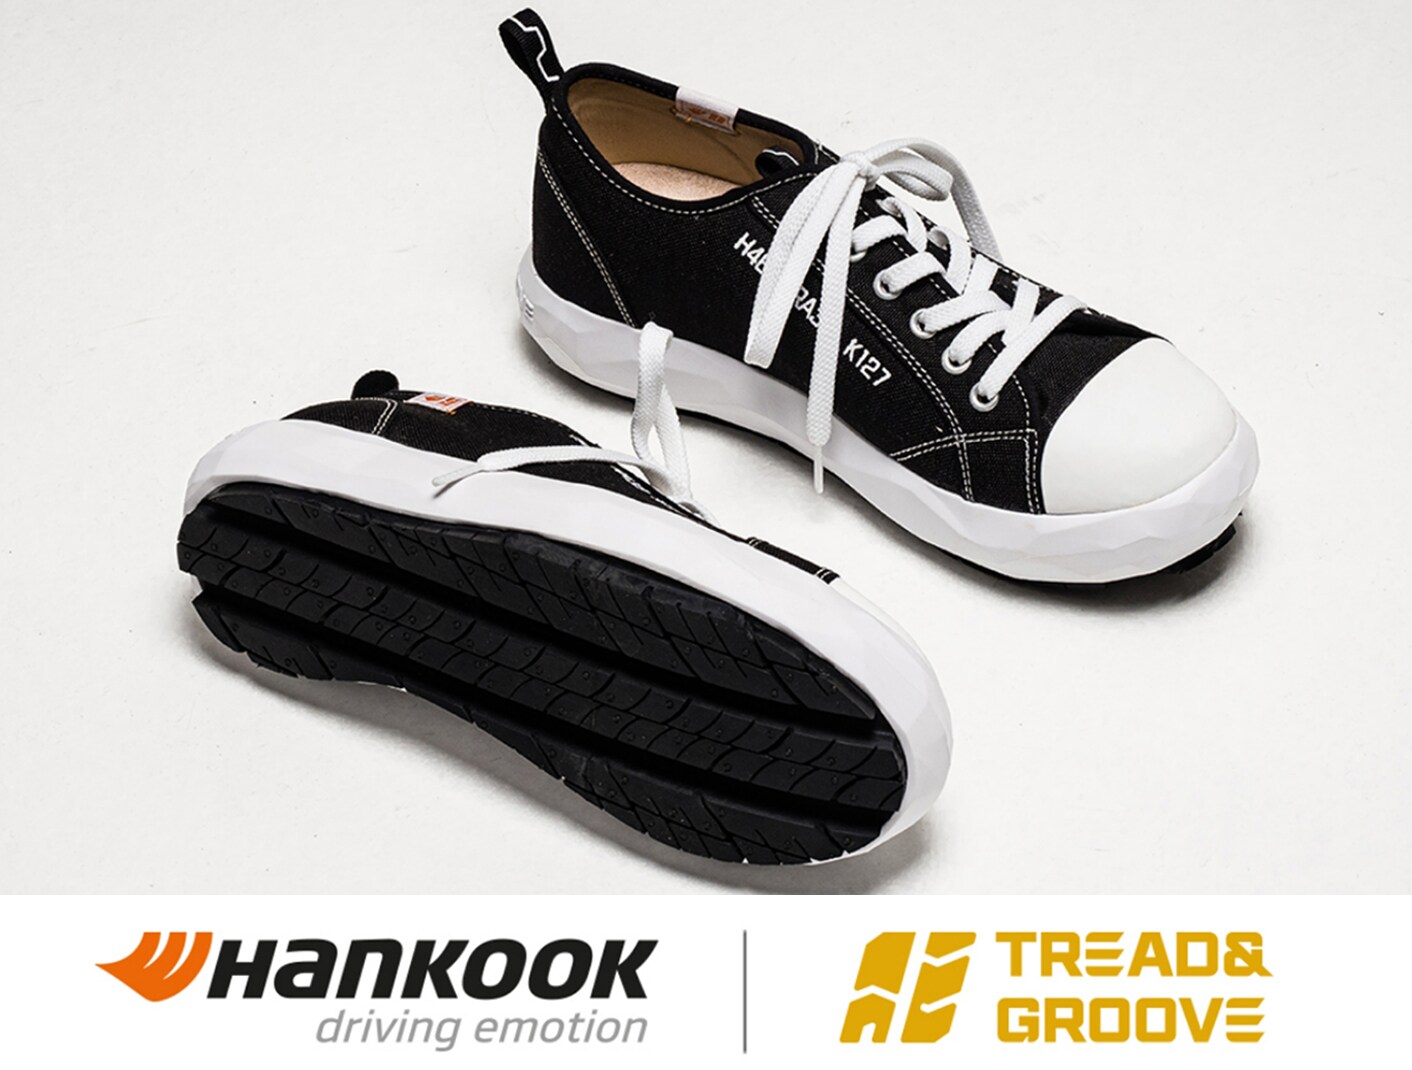 Hankook Tire’s eco-friendly sneaker in collaboration with Tread&Groove pre-sale sold out